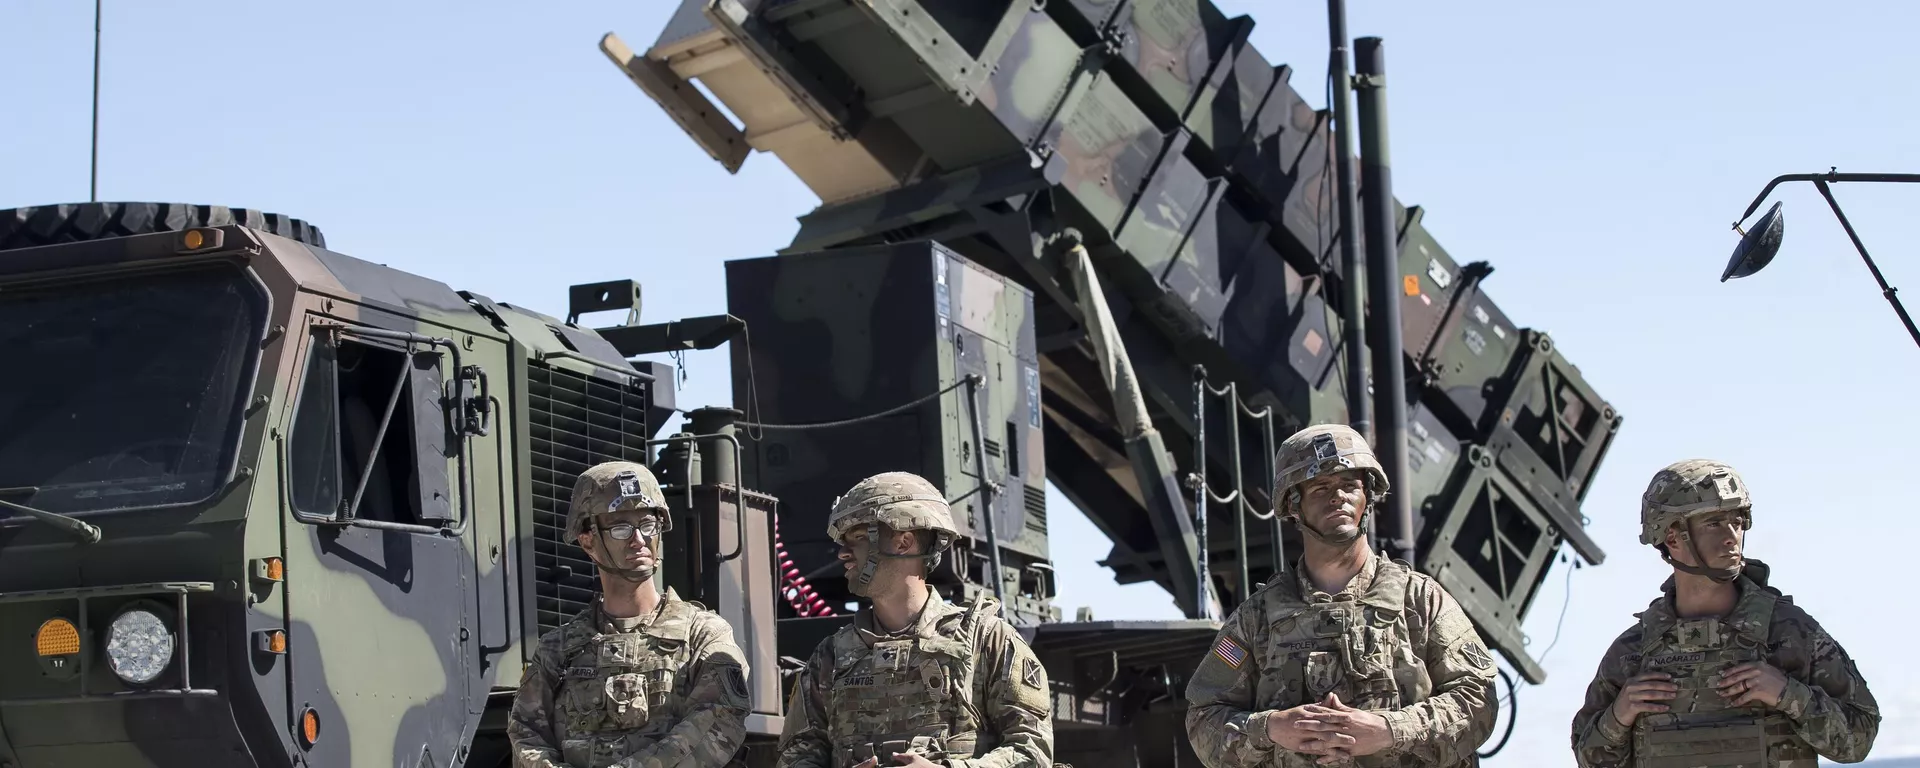 Members of US 10th Army Air and Missile Defense Command stands next to a Patriot surface-to-air missile battery during the NATO multinational ground based air defence units exercise Tobruq Legacy 2017 at the Siauliai airbase some 230 km. (144 miles) east of the capital Vilnius, Lithuania, on July 20, 2017 - Sputnik International, 1920, 17.01.2024